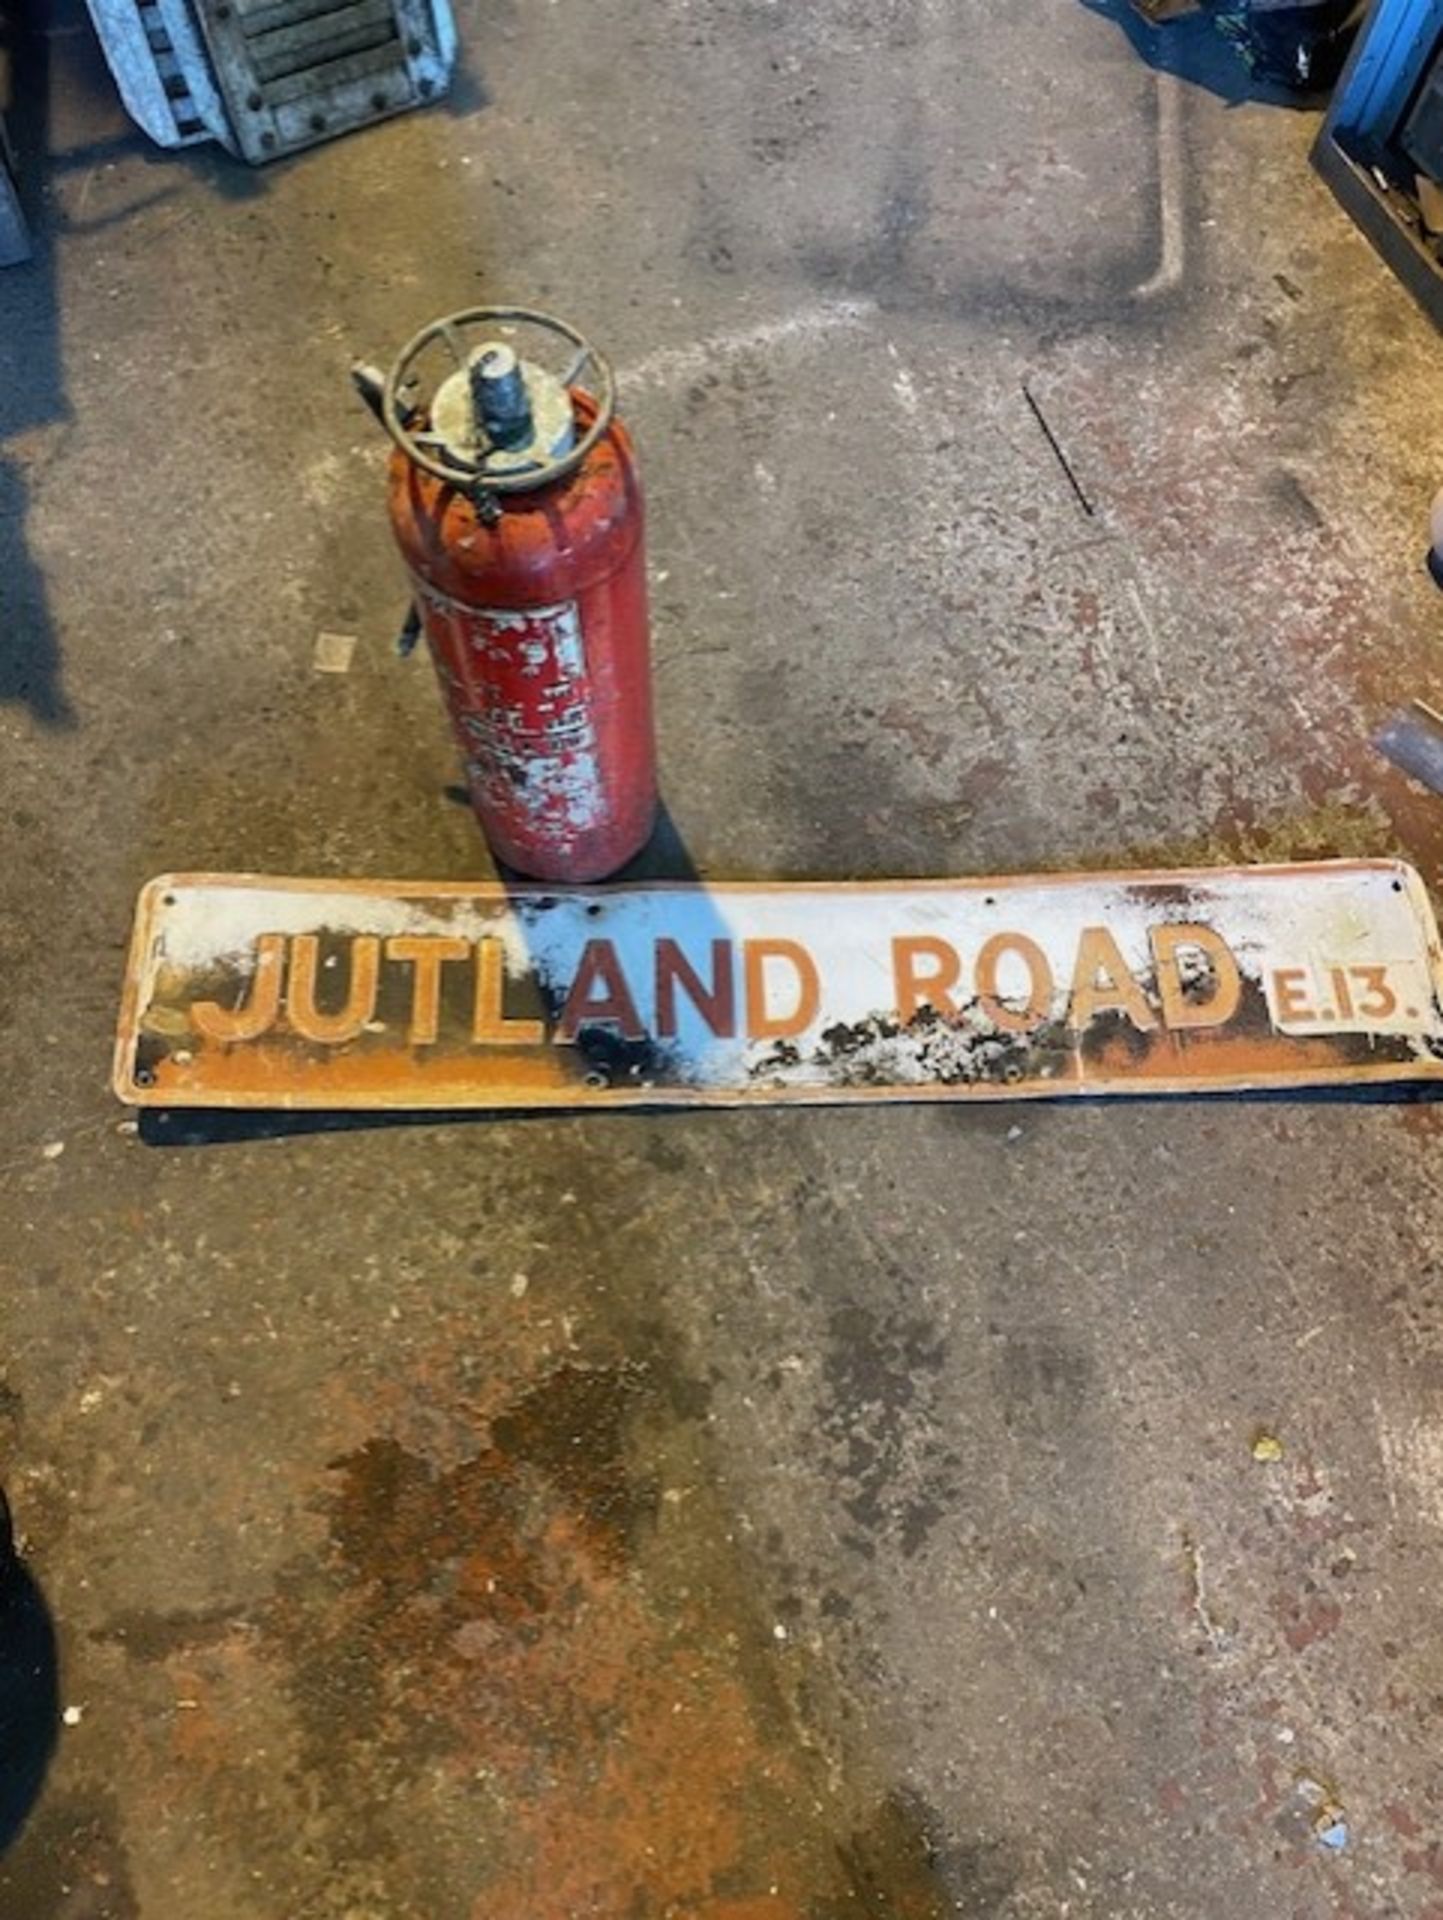 Vintage street sign Jutland road e13 And a vintage empty fire extinguisher will sell seperate also - Image 2 of 3